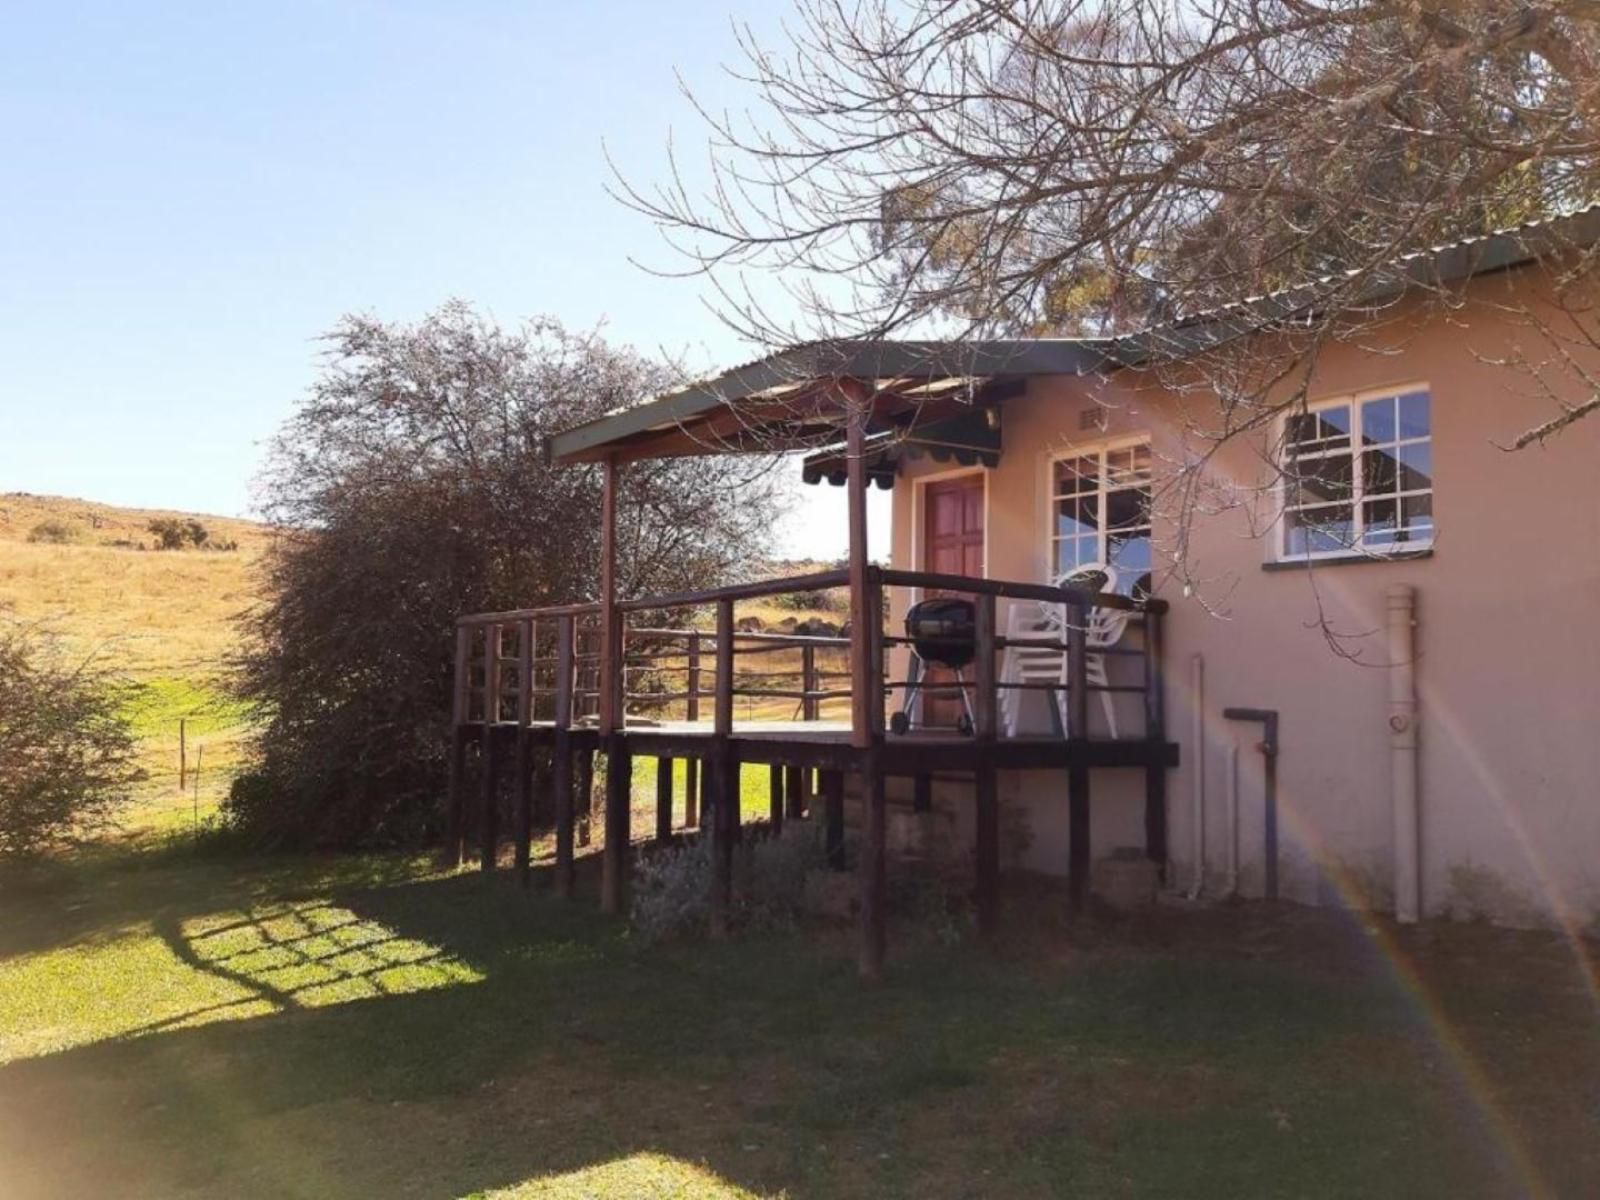 Dabchick Cottage Dullstroom Mpumalanga South Africa House, Building, Architecture